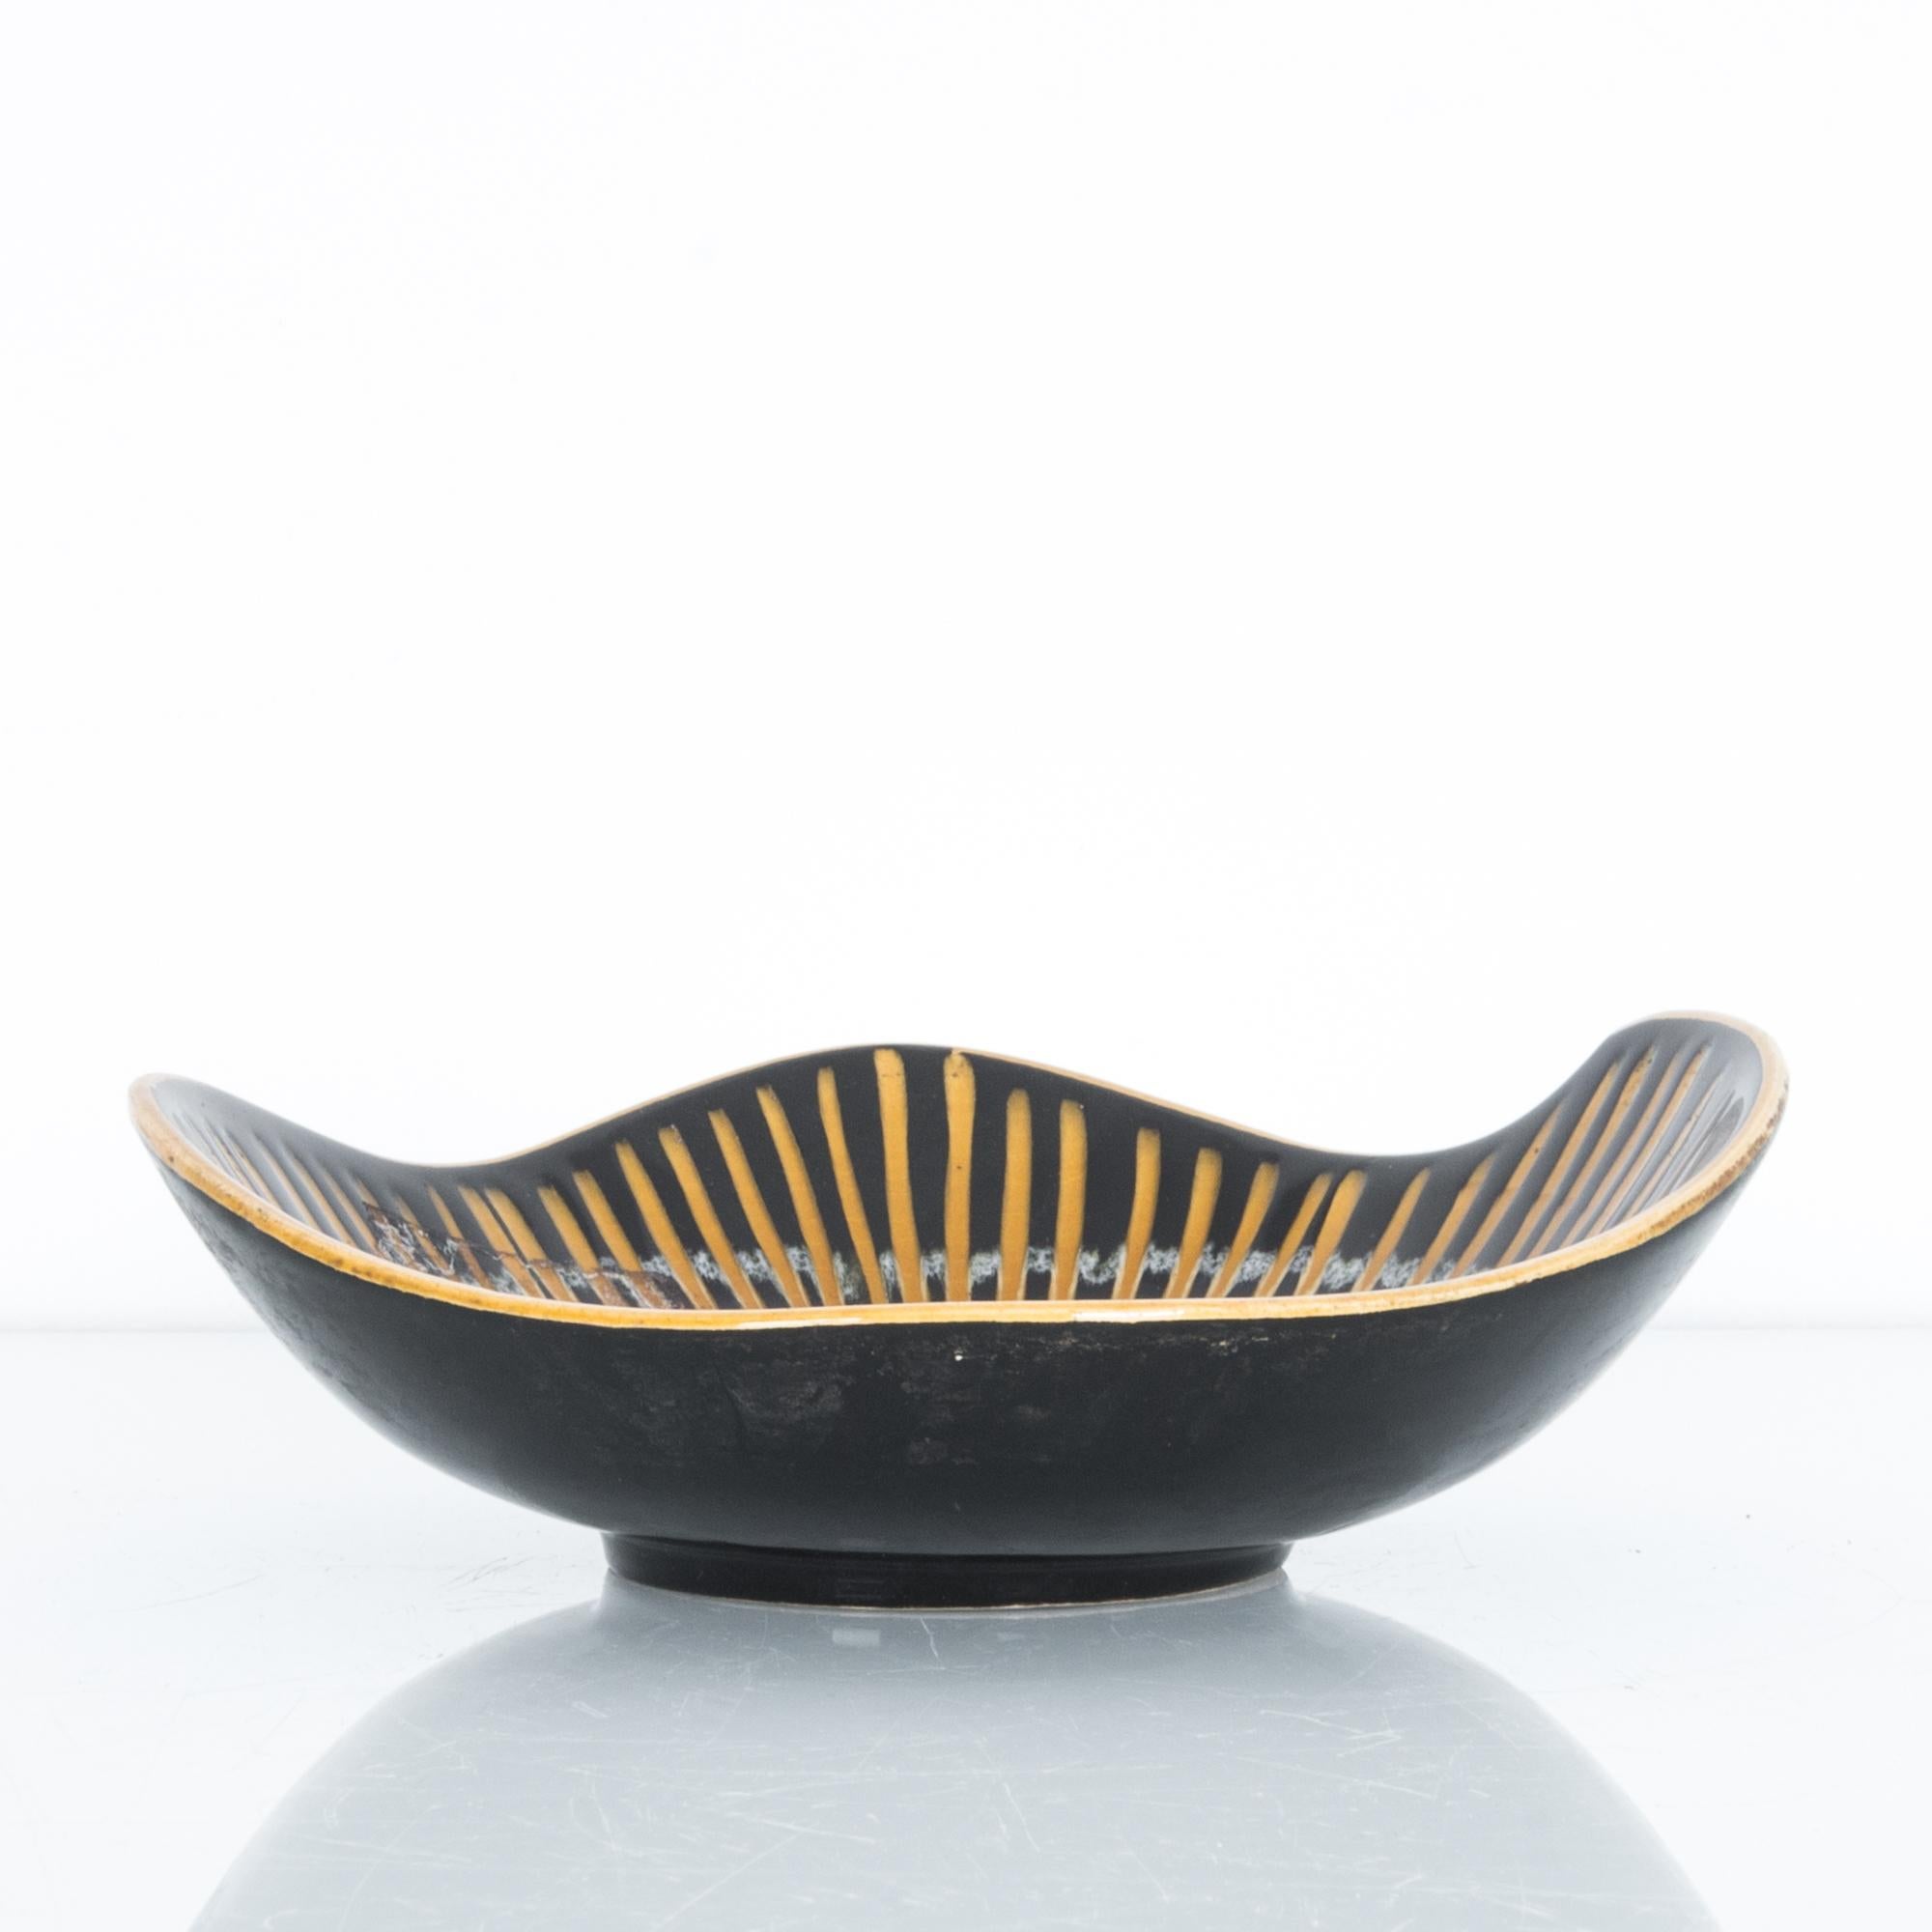 A graphic black and yellow striped platter from Germany, circa 1950. These characteristic mid-20th century ceramics were produced in West Germany, featuring “W. Germany